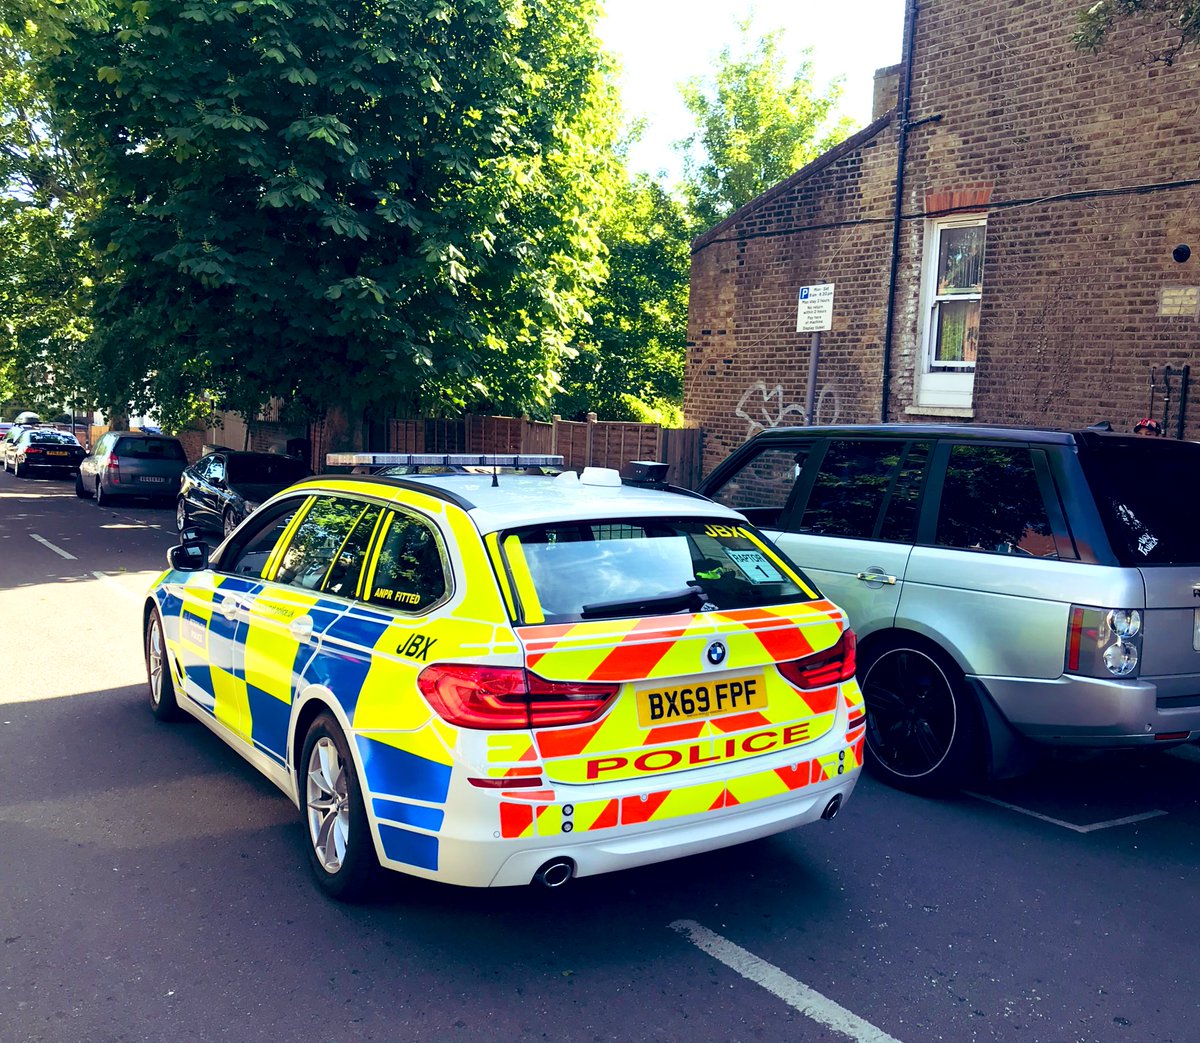 Stopped this Range Rover in Harlesden @MPSBrent - I arrested the driver for no licence / insurance, knife found in car, possession of number of fake ID documents + now we have found a factory making fake driving licences and ID docs @ his home nearby! #RoadCrimeTeam #SpaceForOne